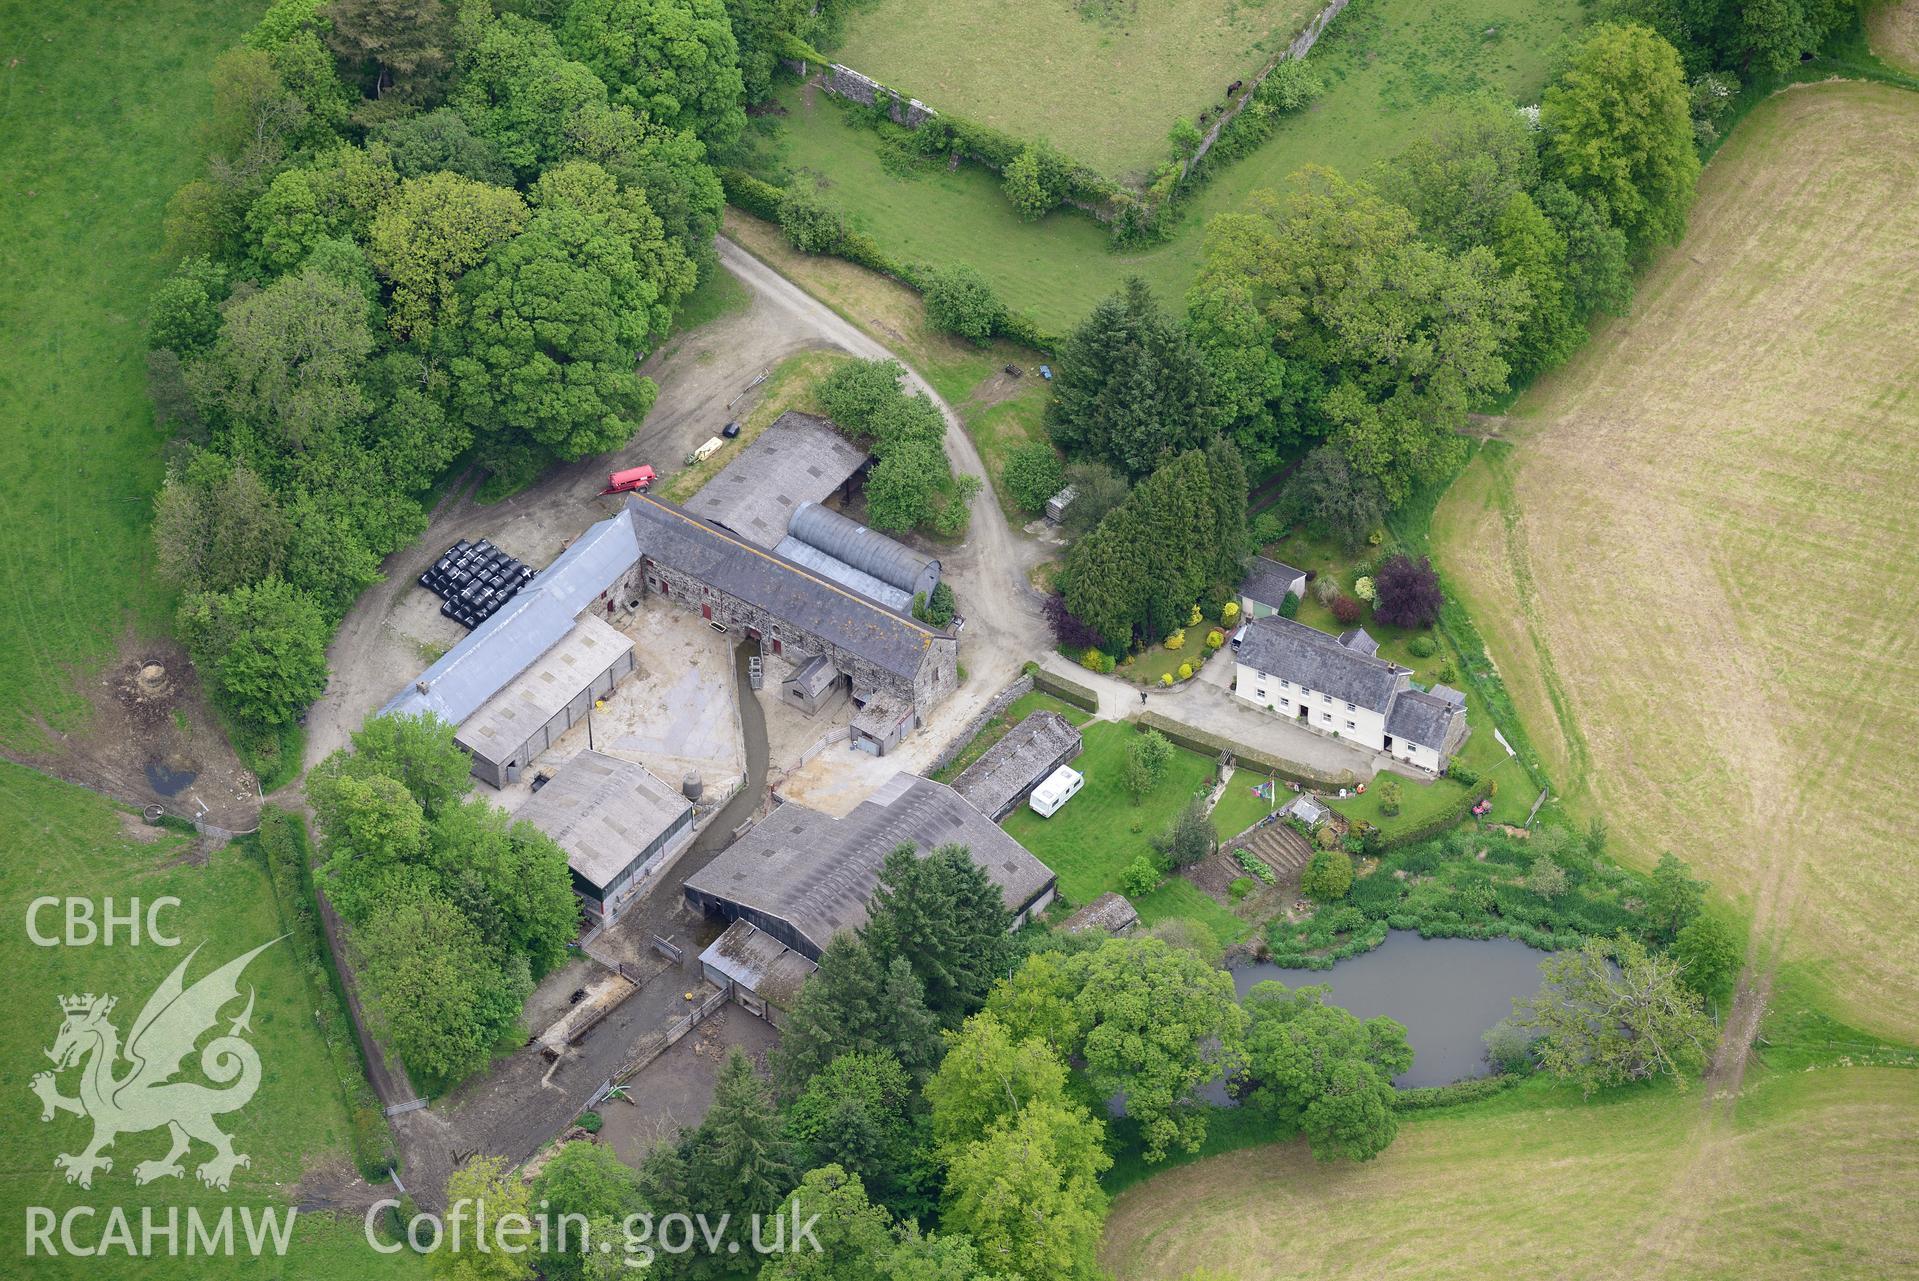 Highmead house and garden and Hendy farm, Llanybydder. Oblique aerial photograph taken during the Royal Commission's programme of archaeological aerial reconnaissance by Toby Driver on 3rd June 2015.